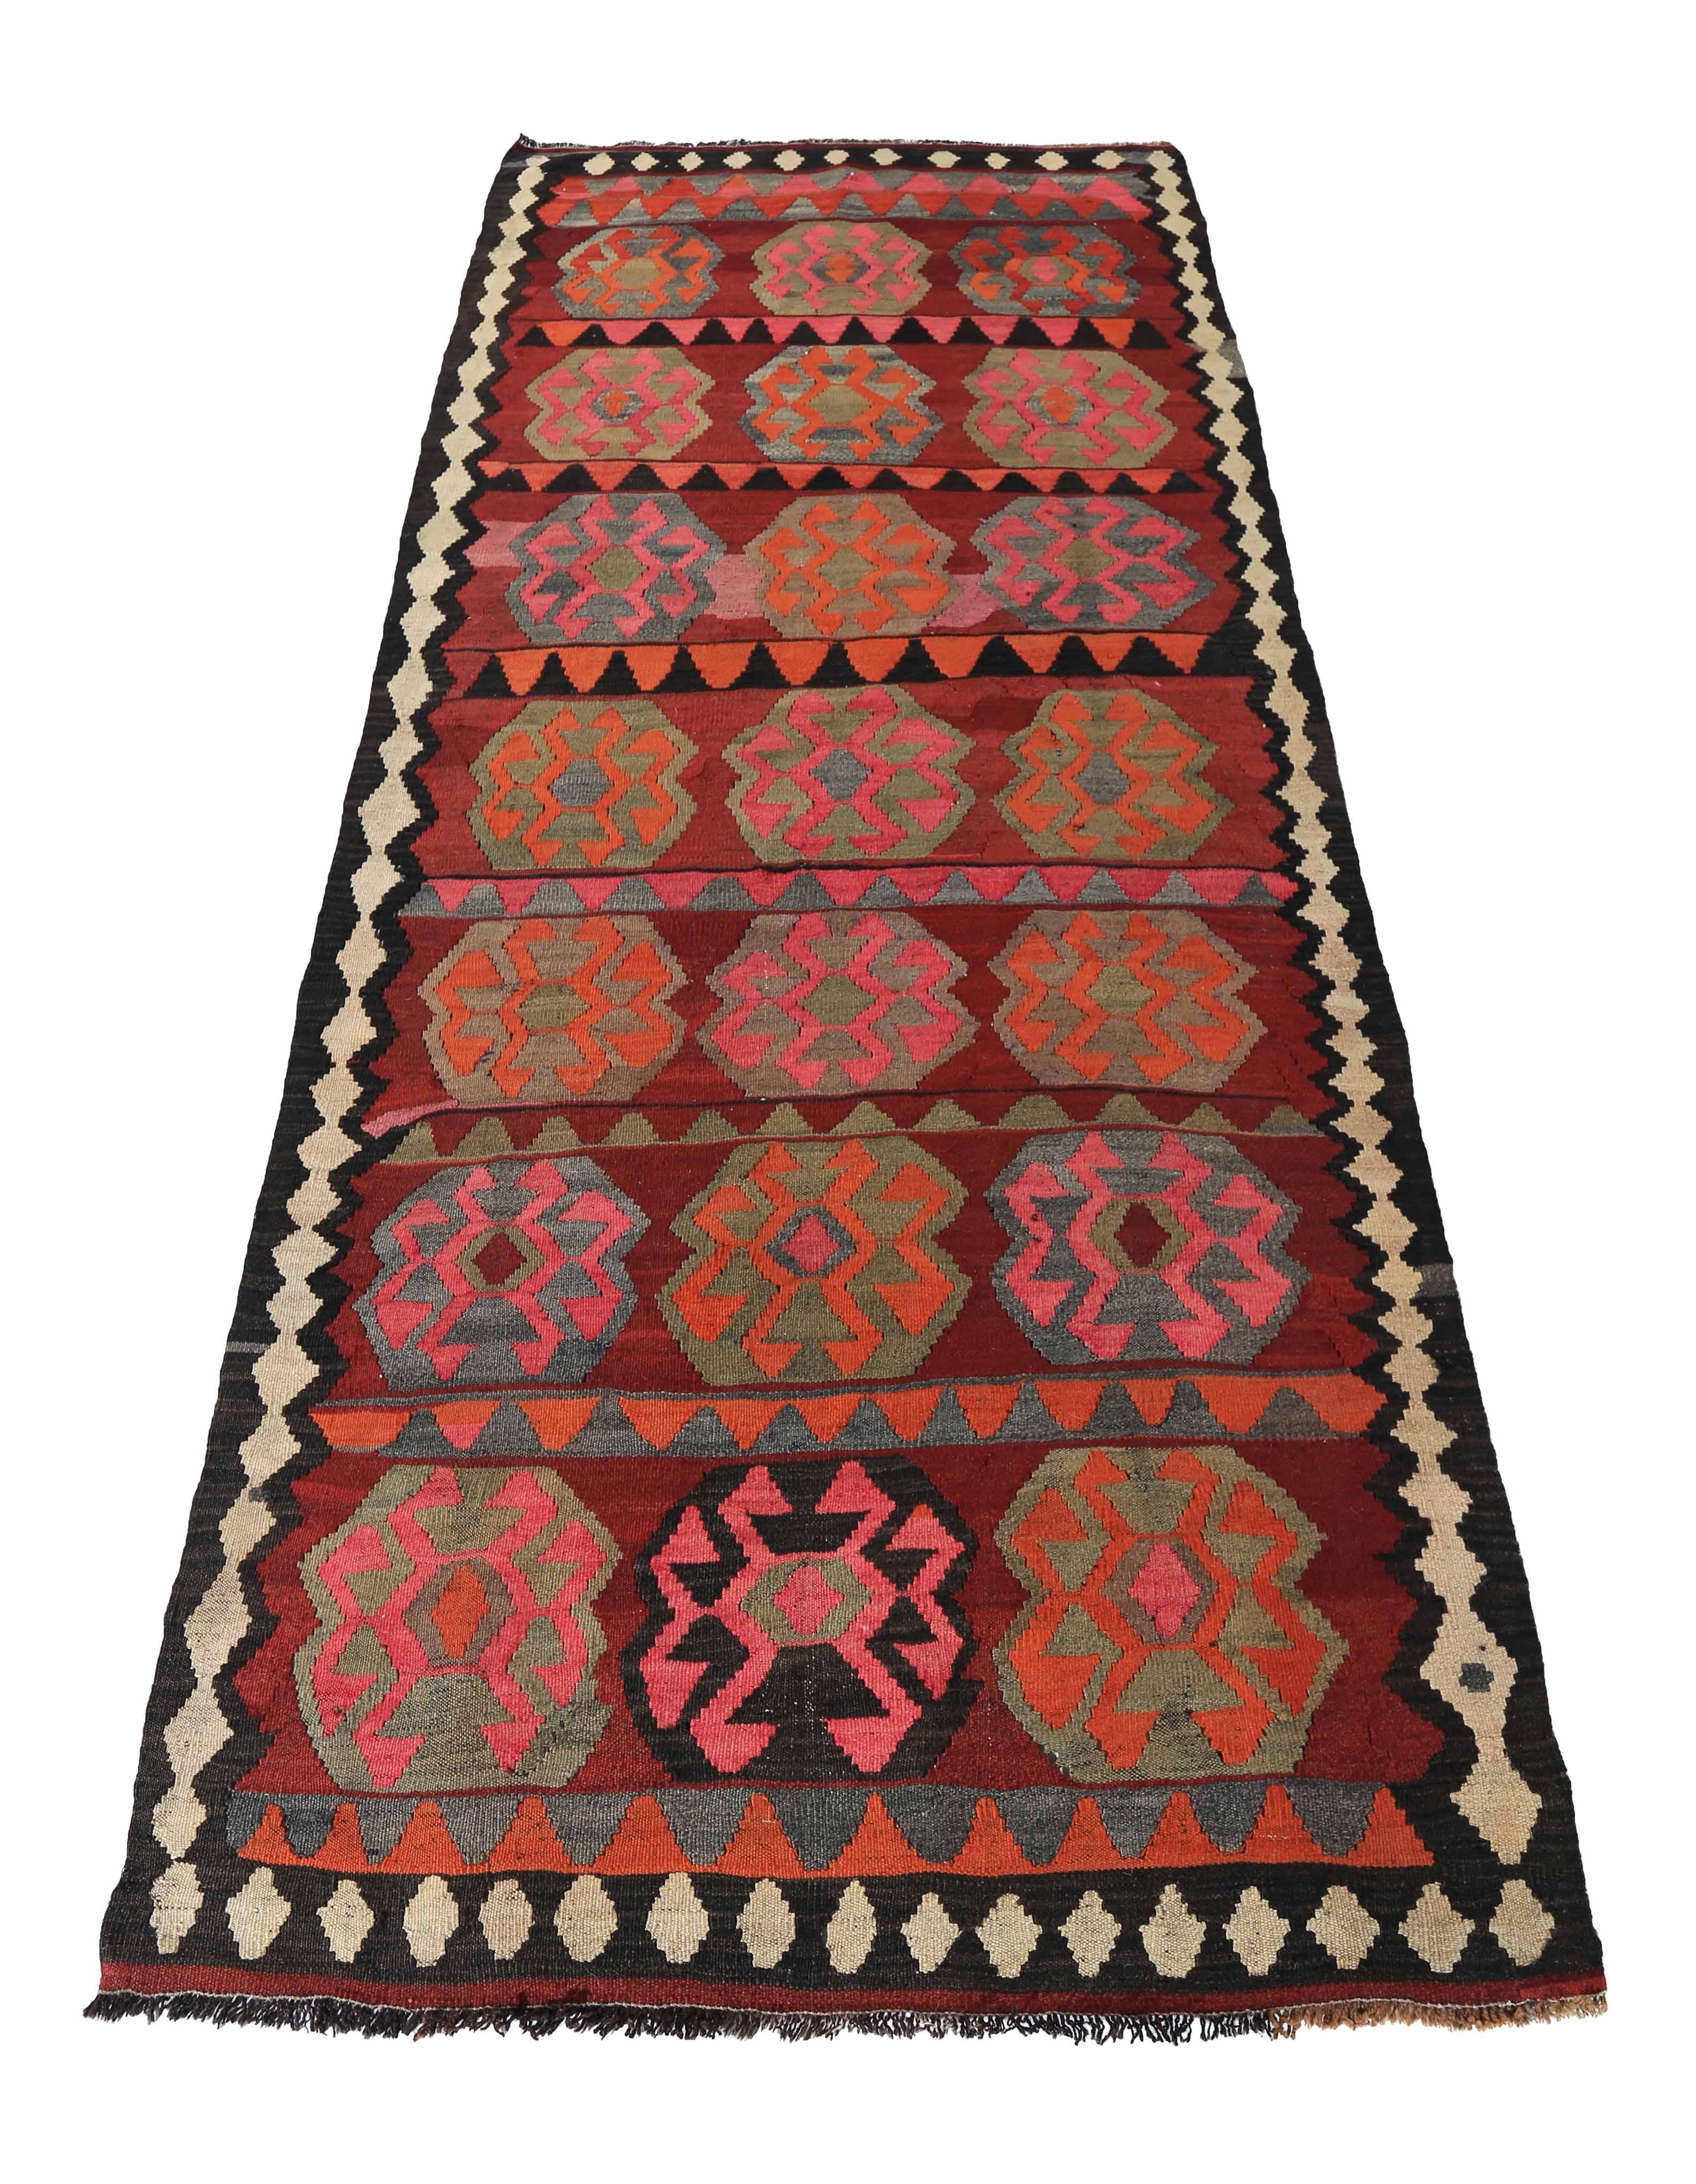 Modern Turkish rug handwoven from the finest sheep’s wool and colored with all-natural vegetable dyes that are safe for humans and pets. It’s a traditional Kilim flat-weave design featuring orange, pink and red tribal medallions. It’s a stunning